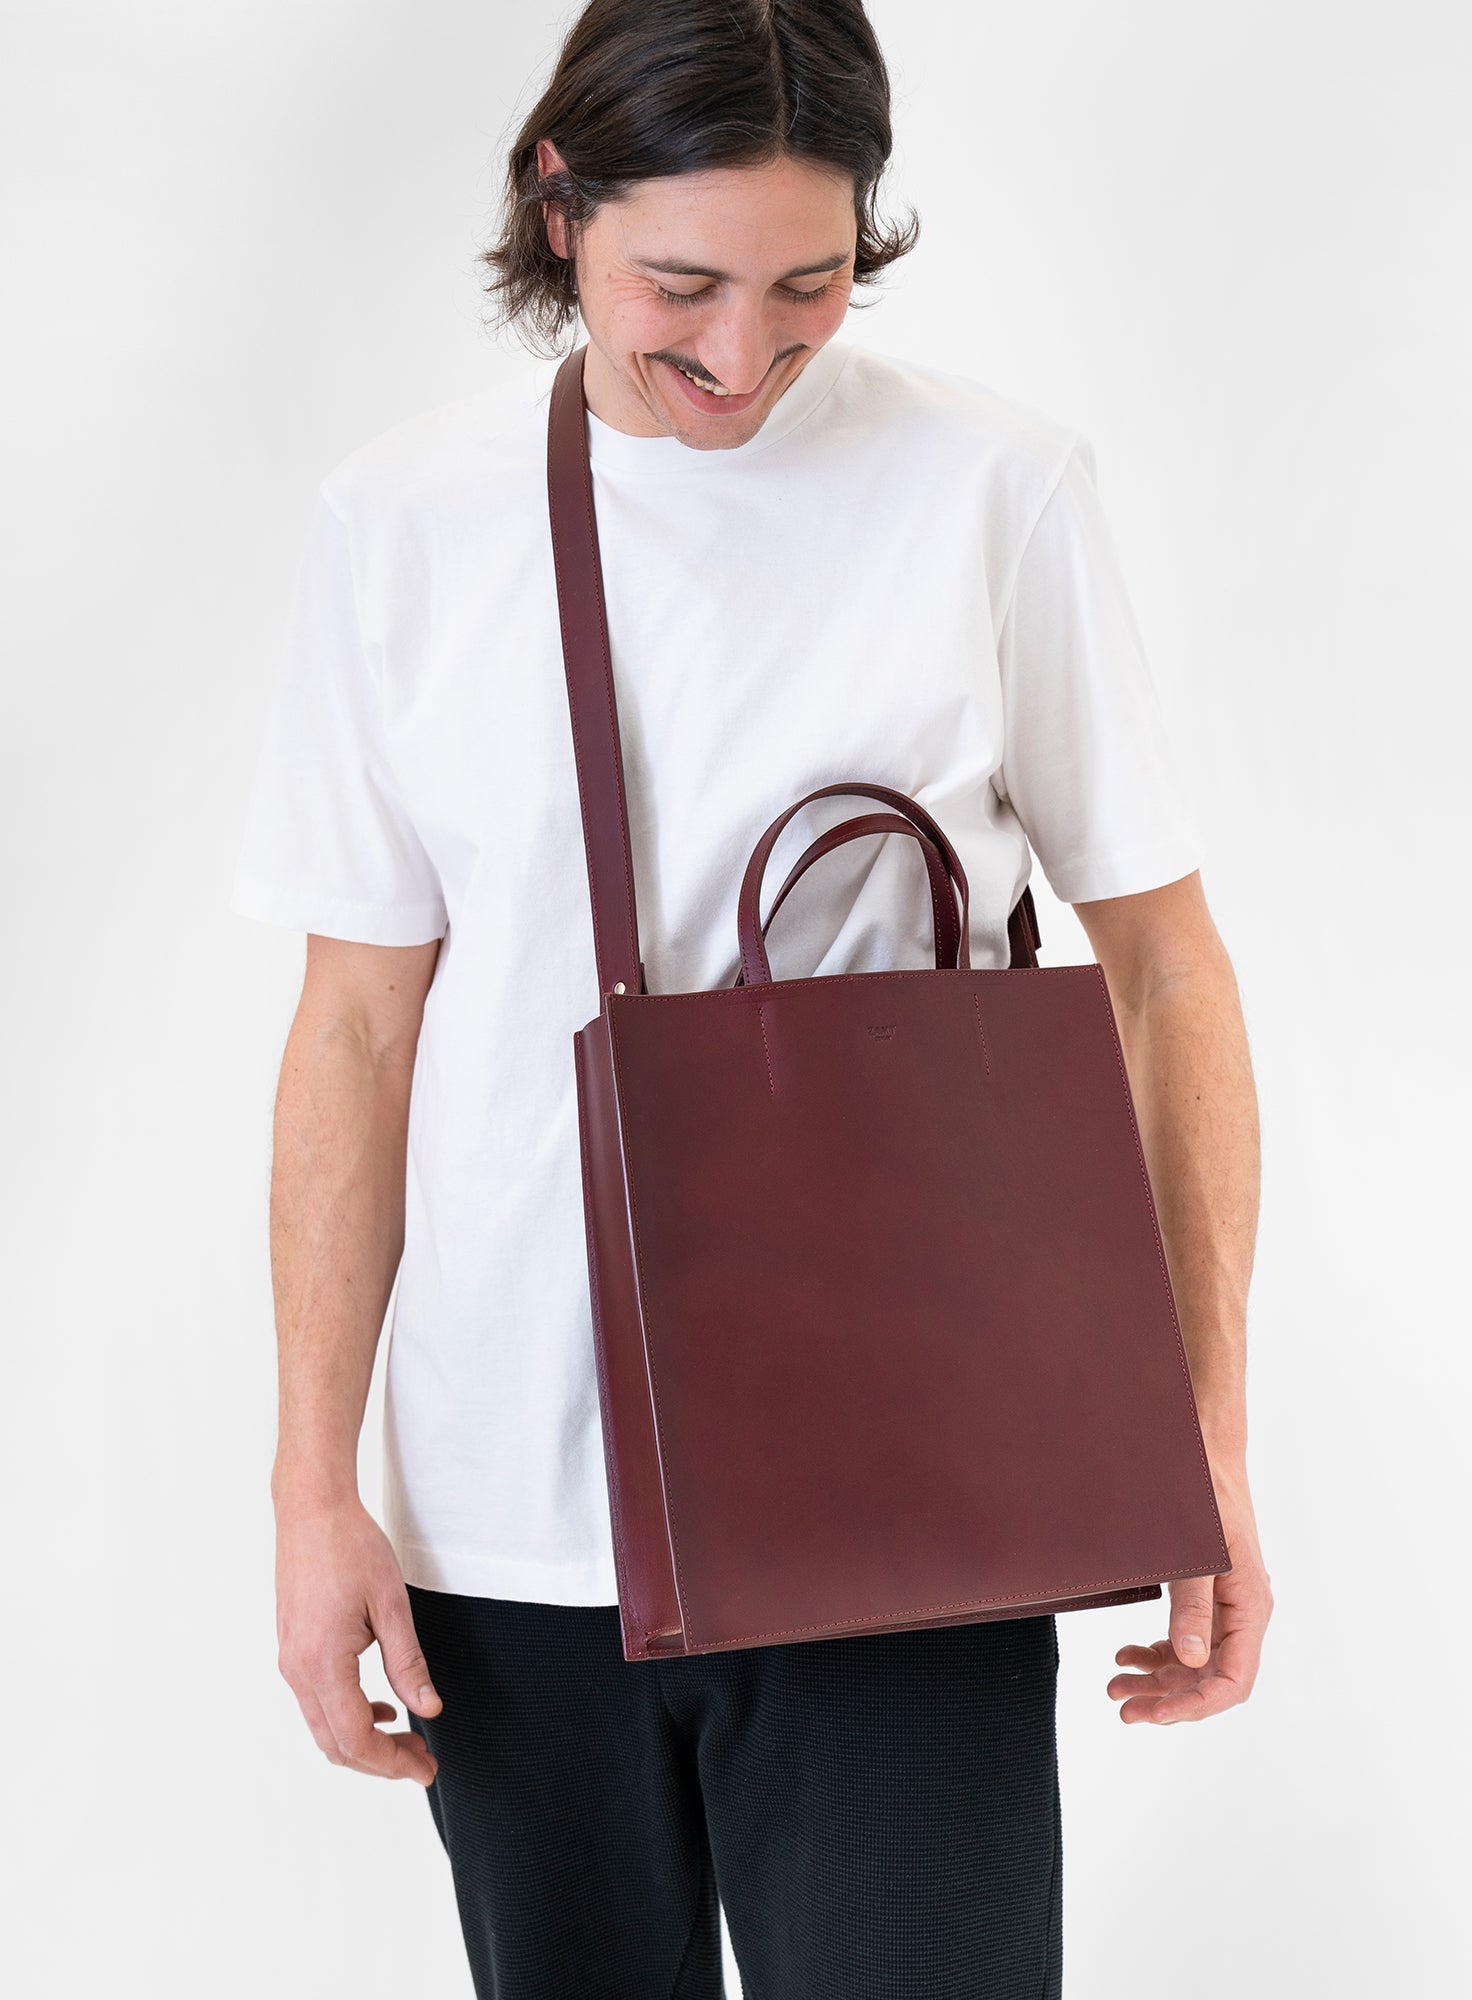 CONTAINER_BAG_FINCH_BORDEAUX_Designed_in_Berlin_Made_to_last_Handmade_in_Poland.